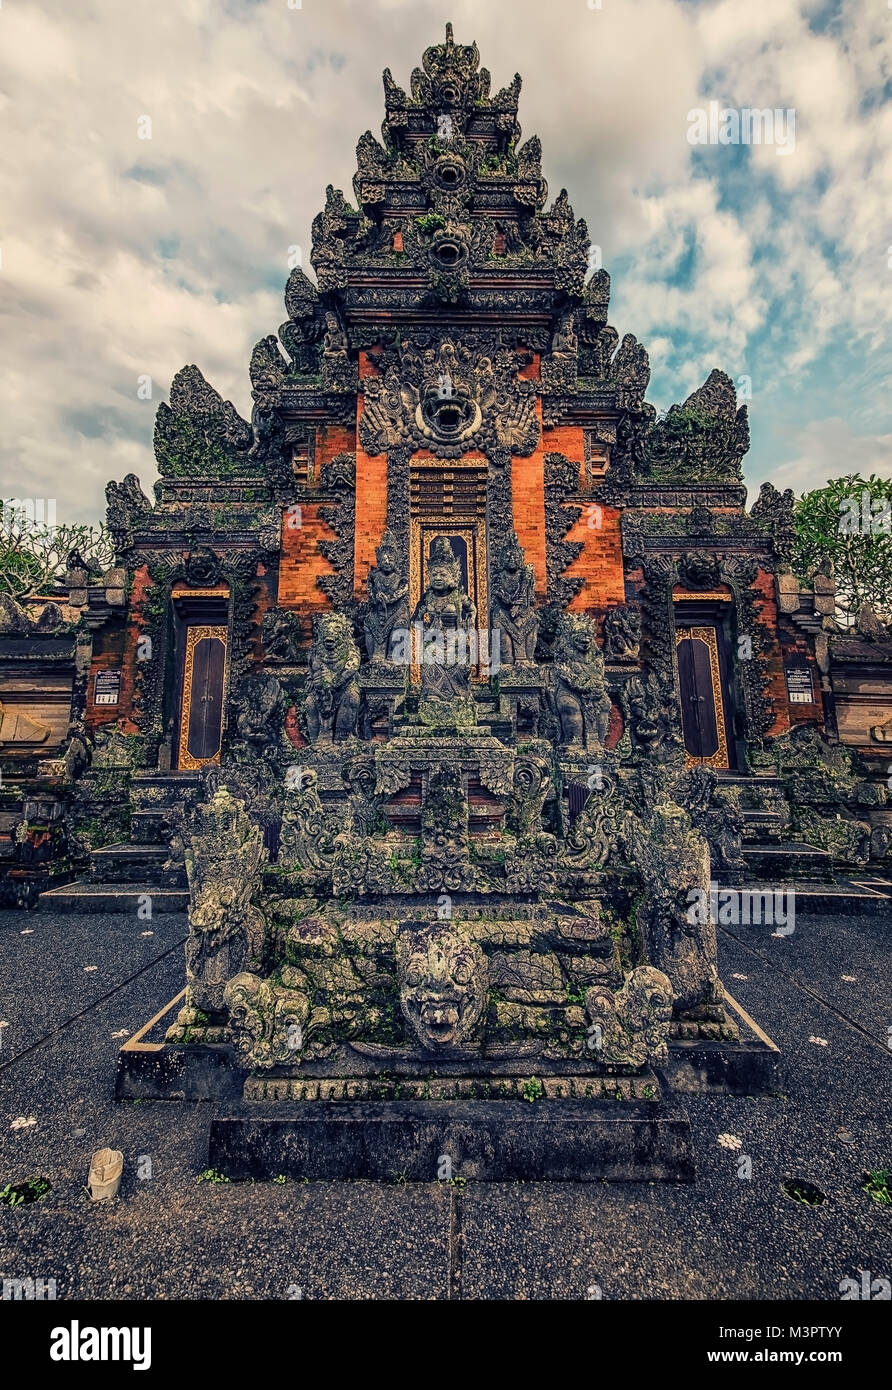 typical architecture in Bali Stock Photo